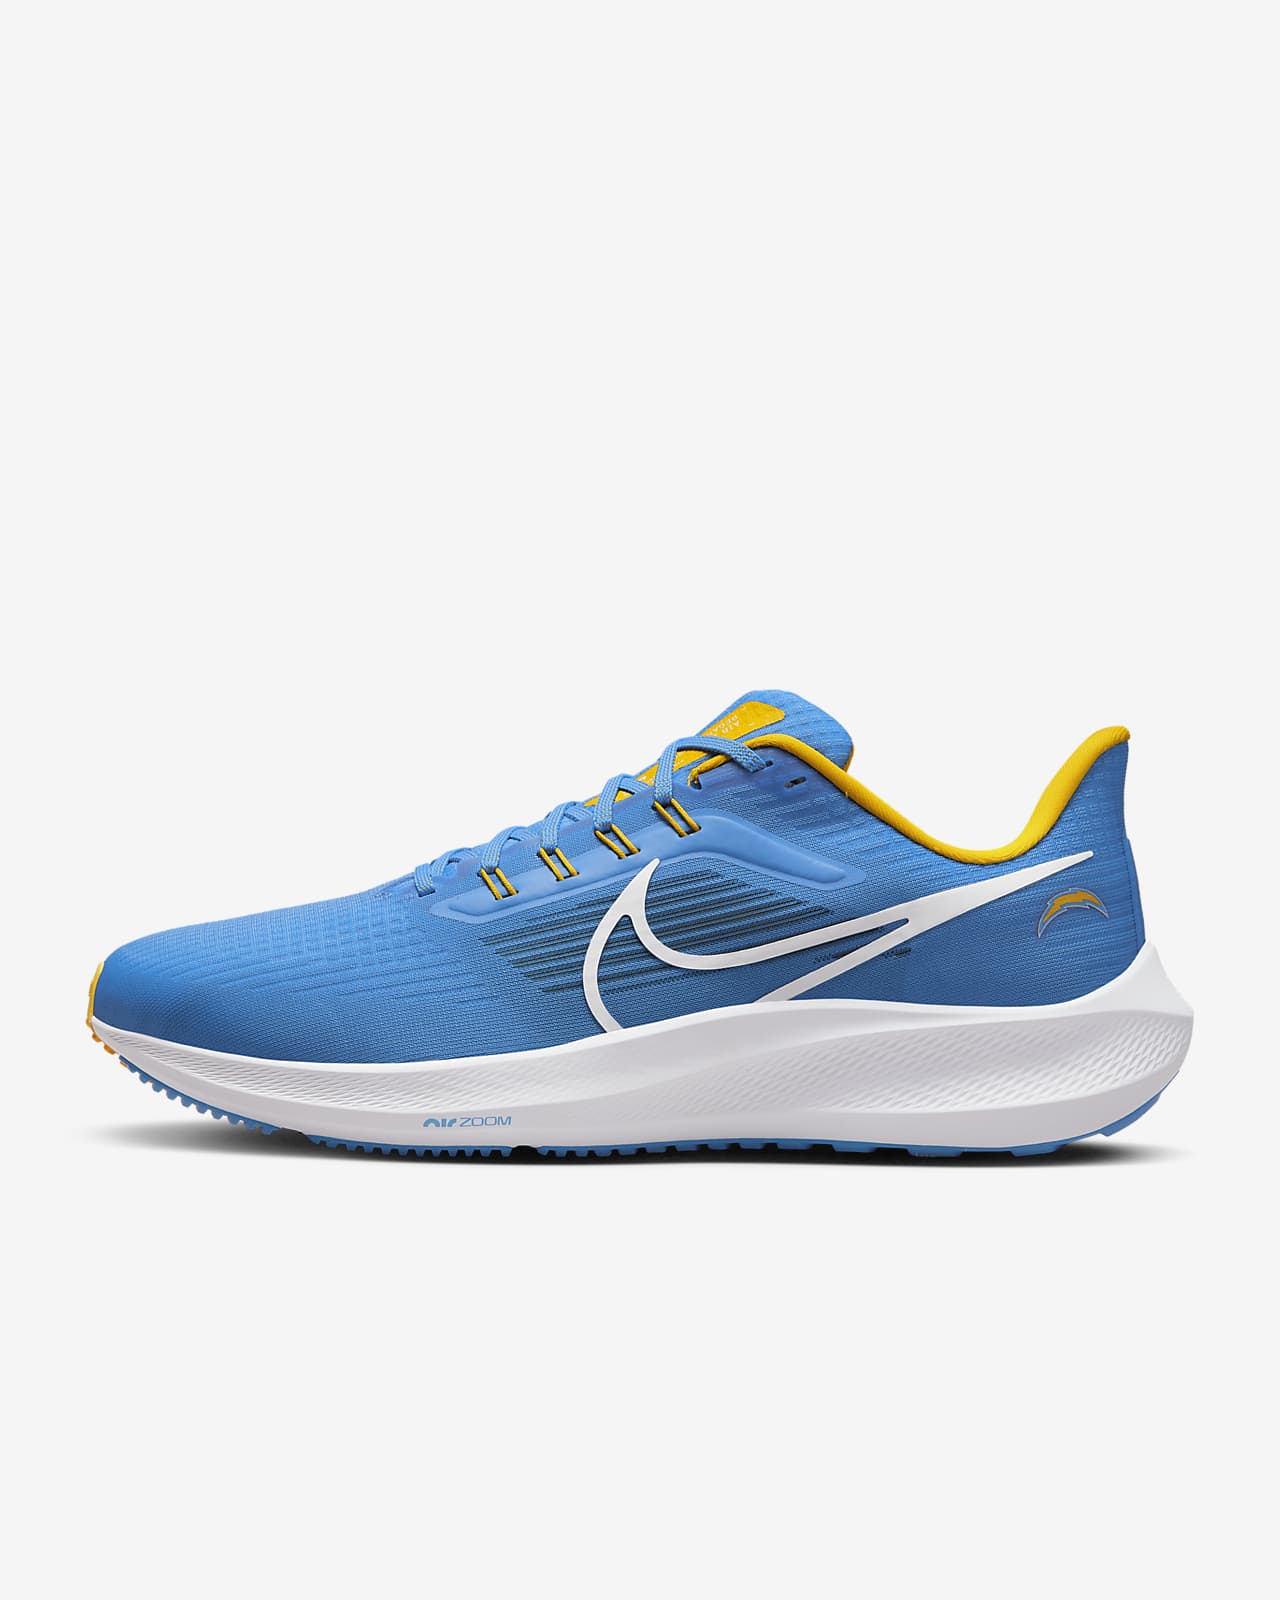 Nike Pegasus 39 (NFL Los Angeles Chargers) Men's Road Running Shoes